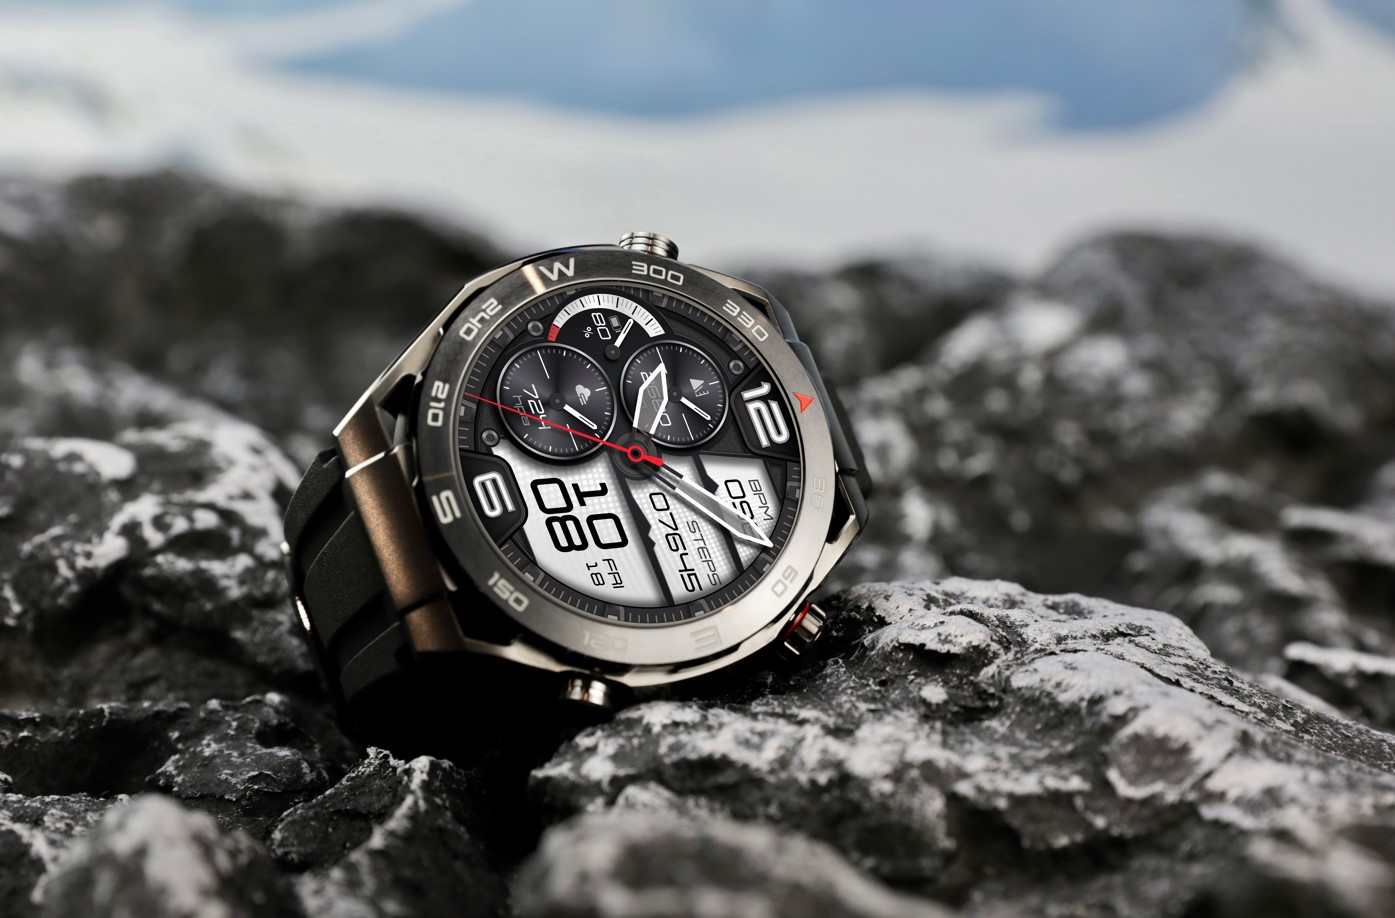 Tough Huawei Watch Ultimate Expedition Black Edition smartwatch priced ...